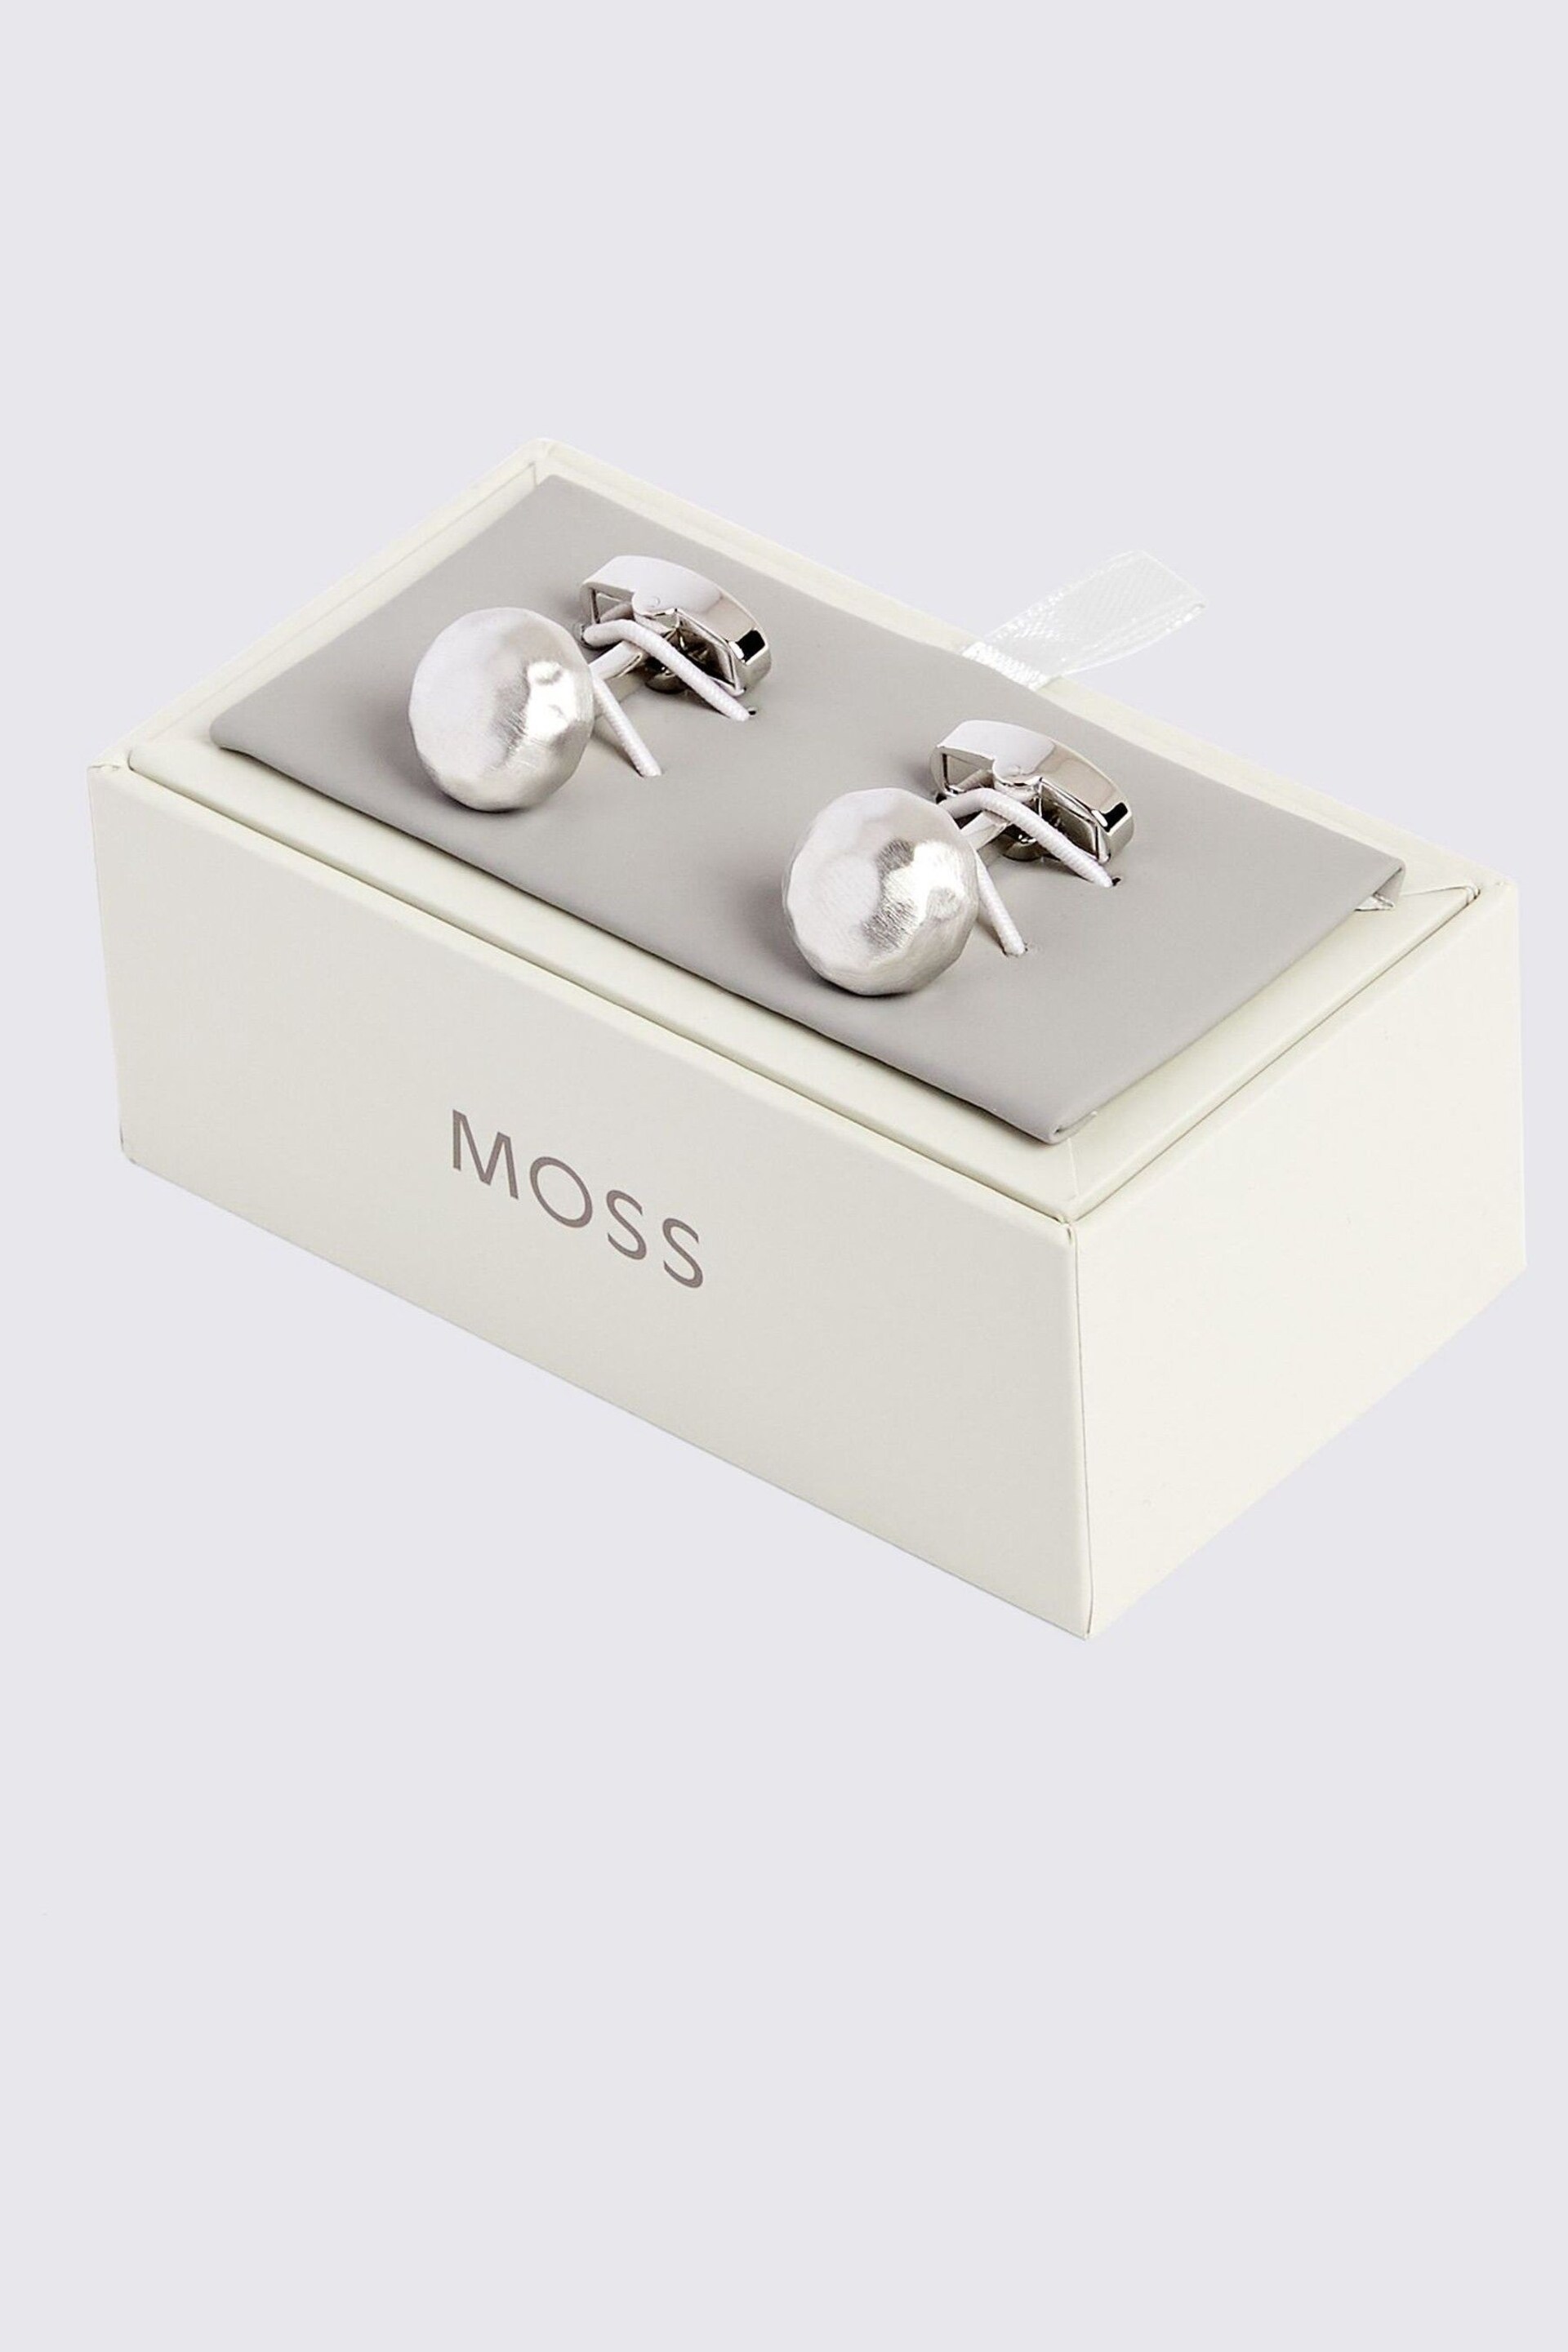 MOSS Grey Brushed Dome Cufflinks - Image 2 of 2